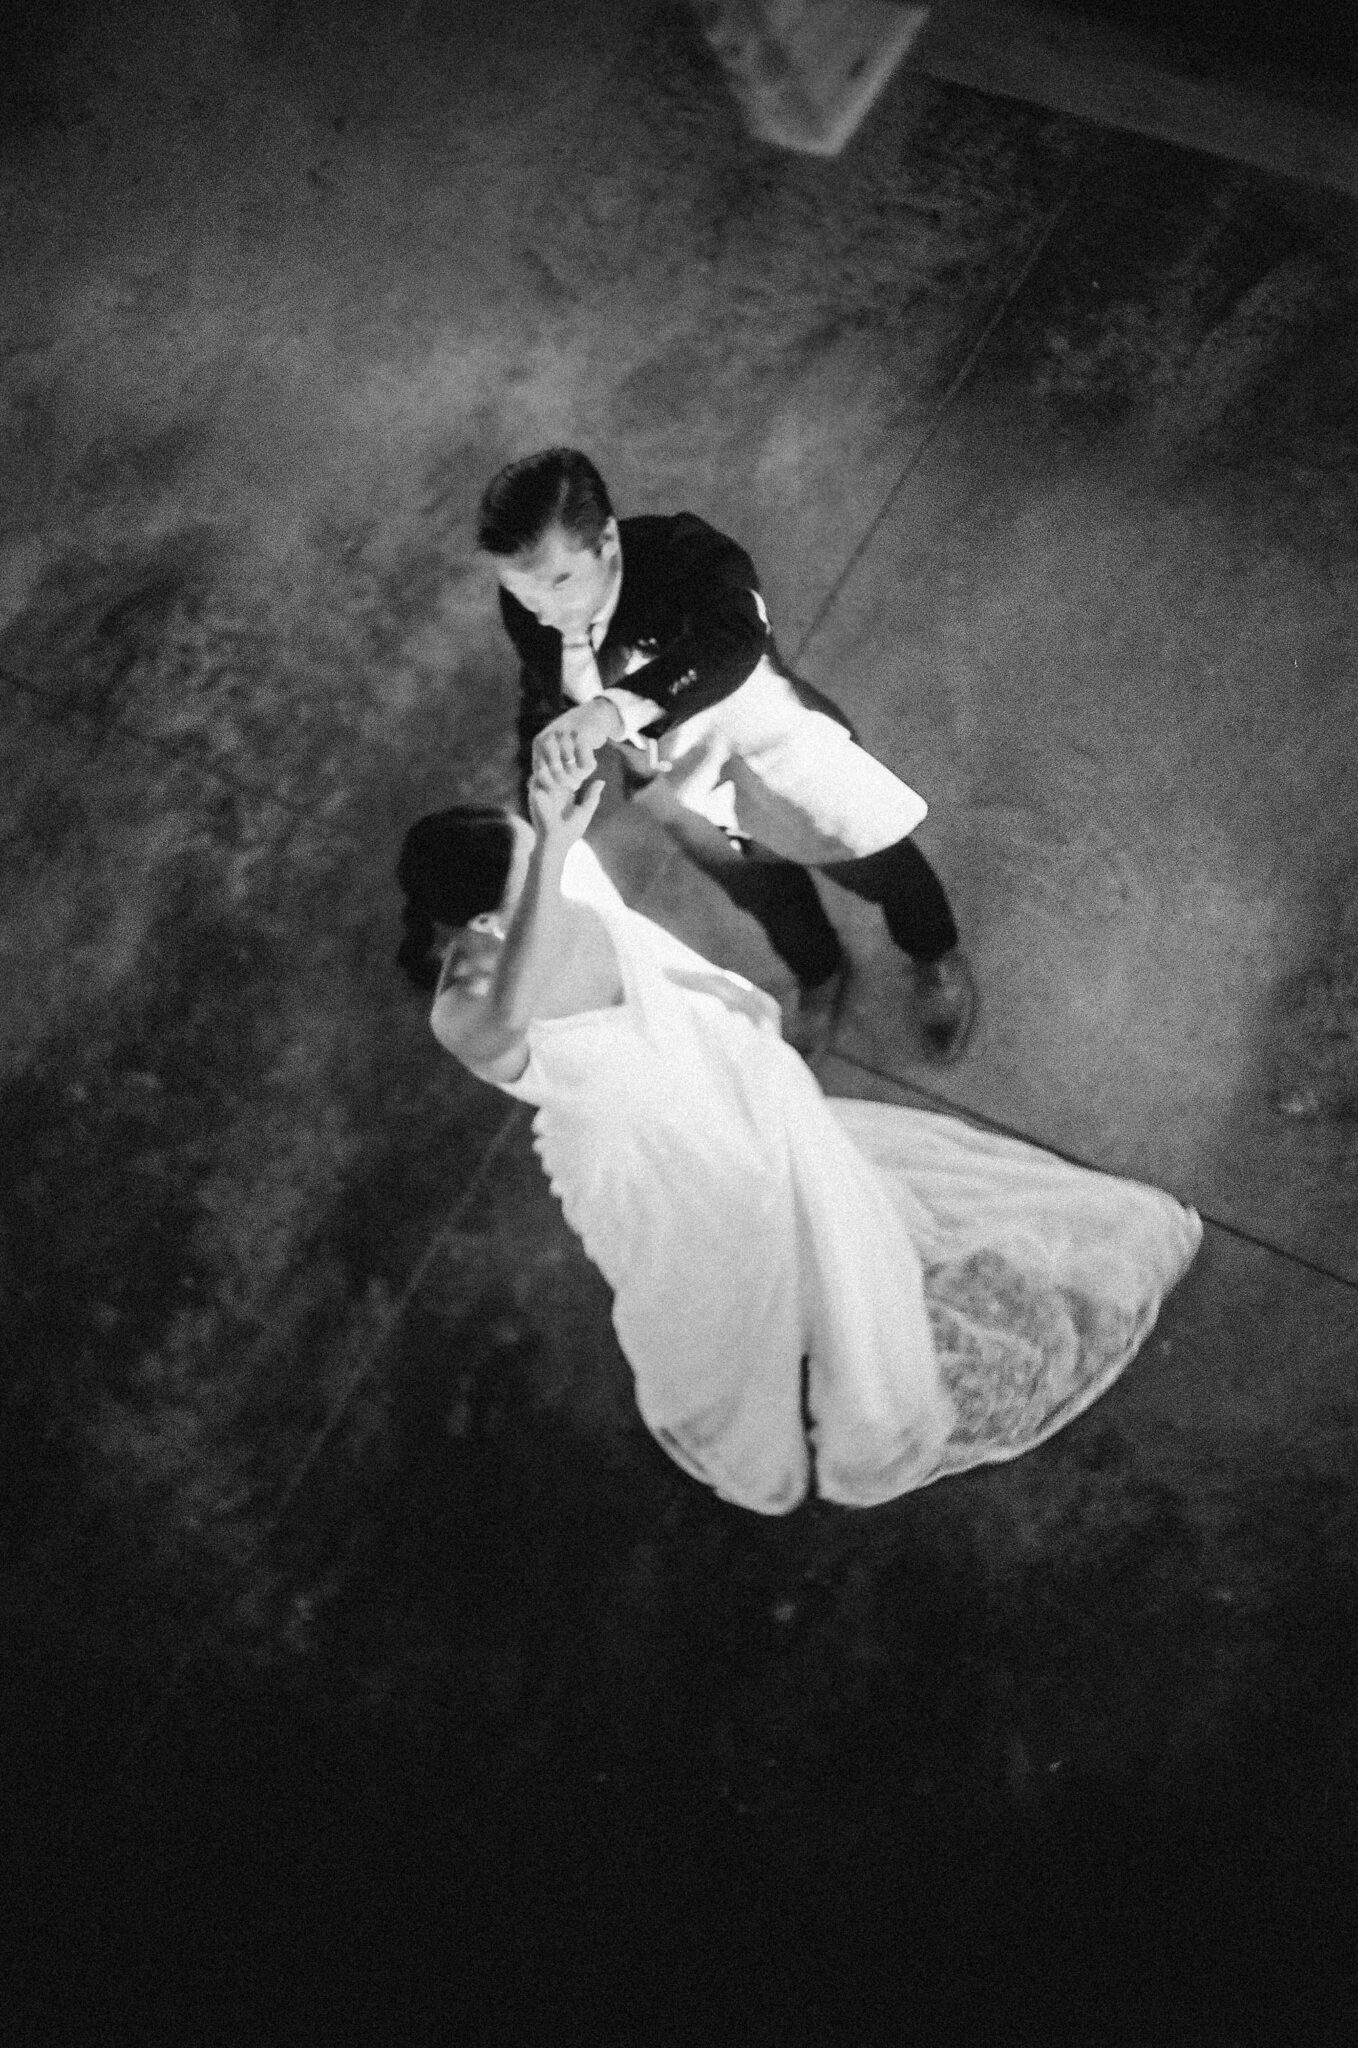 Wedding Inspiration With An Updated Take on Country Chic Wedding Style at Countryside Barn in Lethbridge Alberta, black and white film portrait of bride and groom dancing, film photography style.